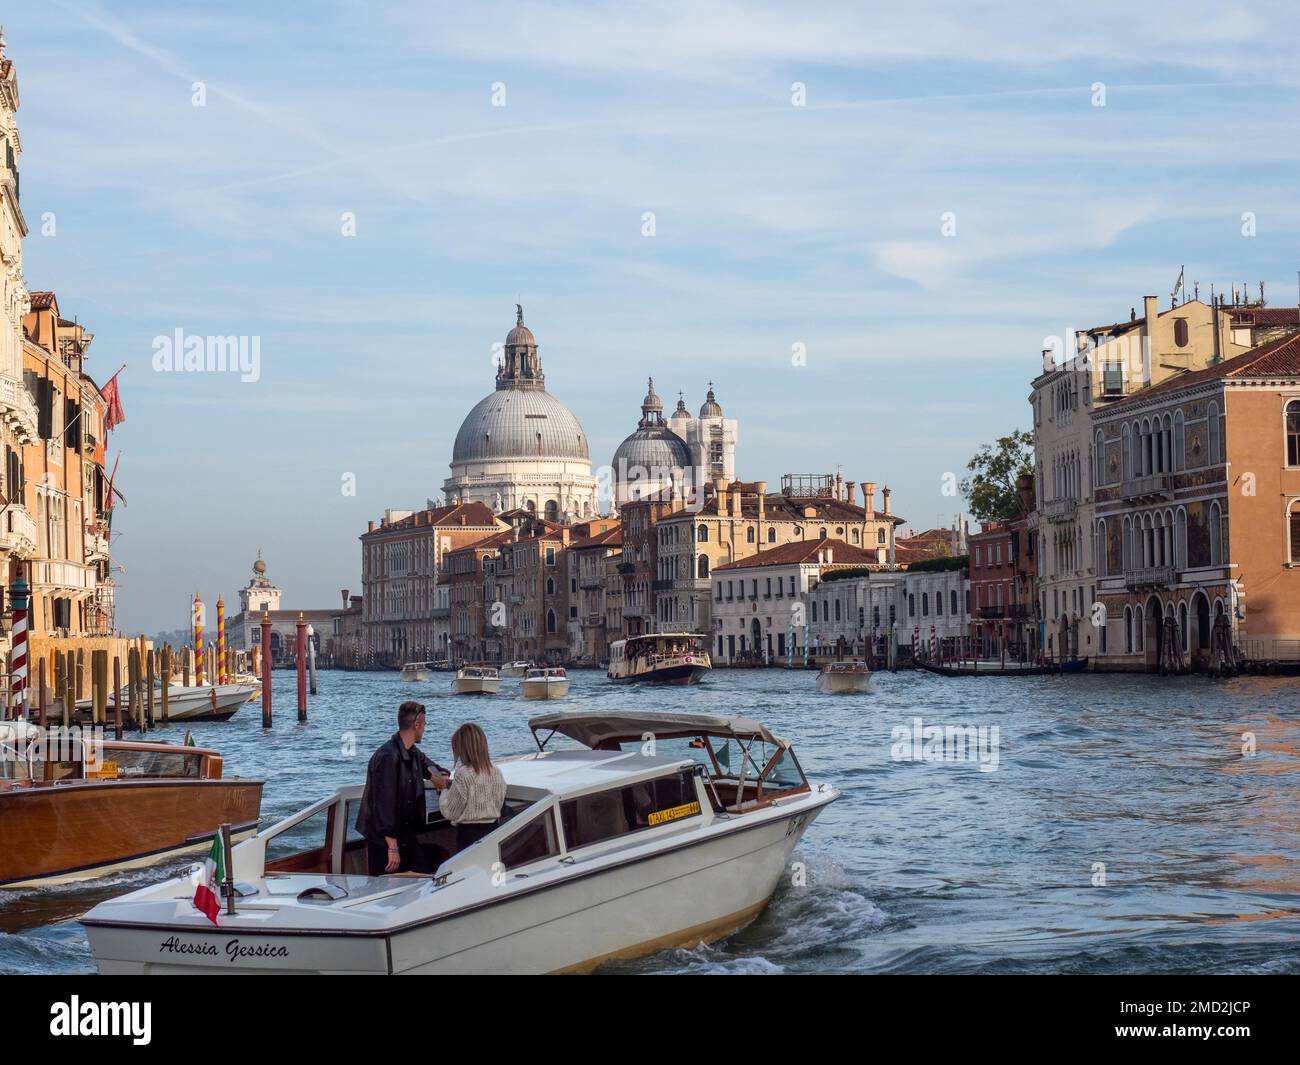 October 31, 2022 - Venice, Italy: The grand canal in Venice at daytime. Tourism concept. Stock Photo